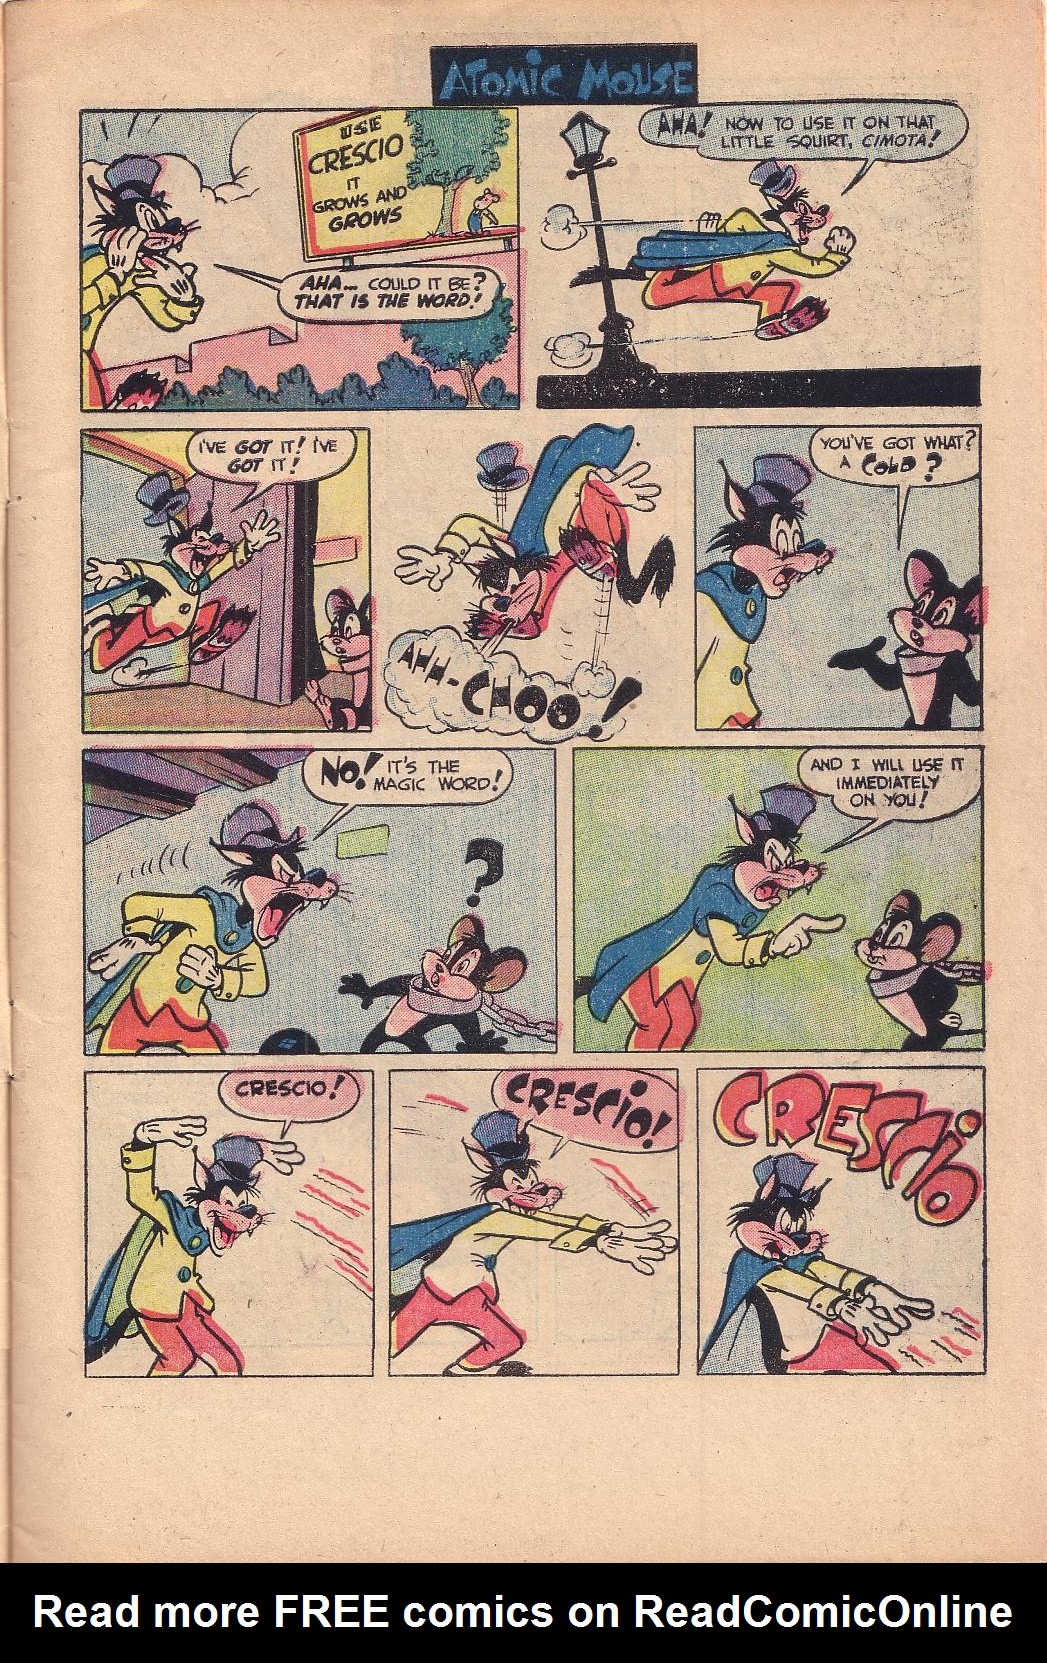 Read online Atomic Mouse comic -  Issue #1 - 31